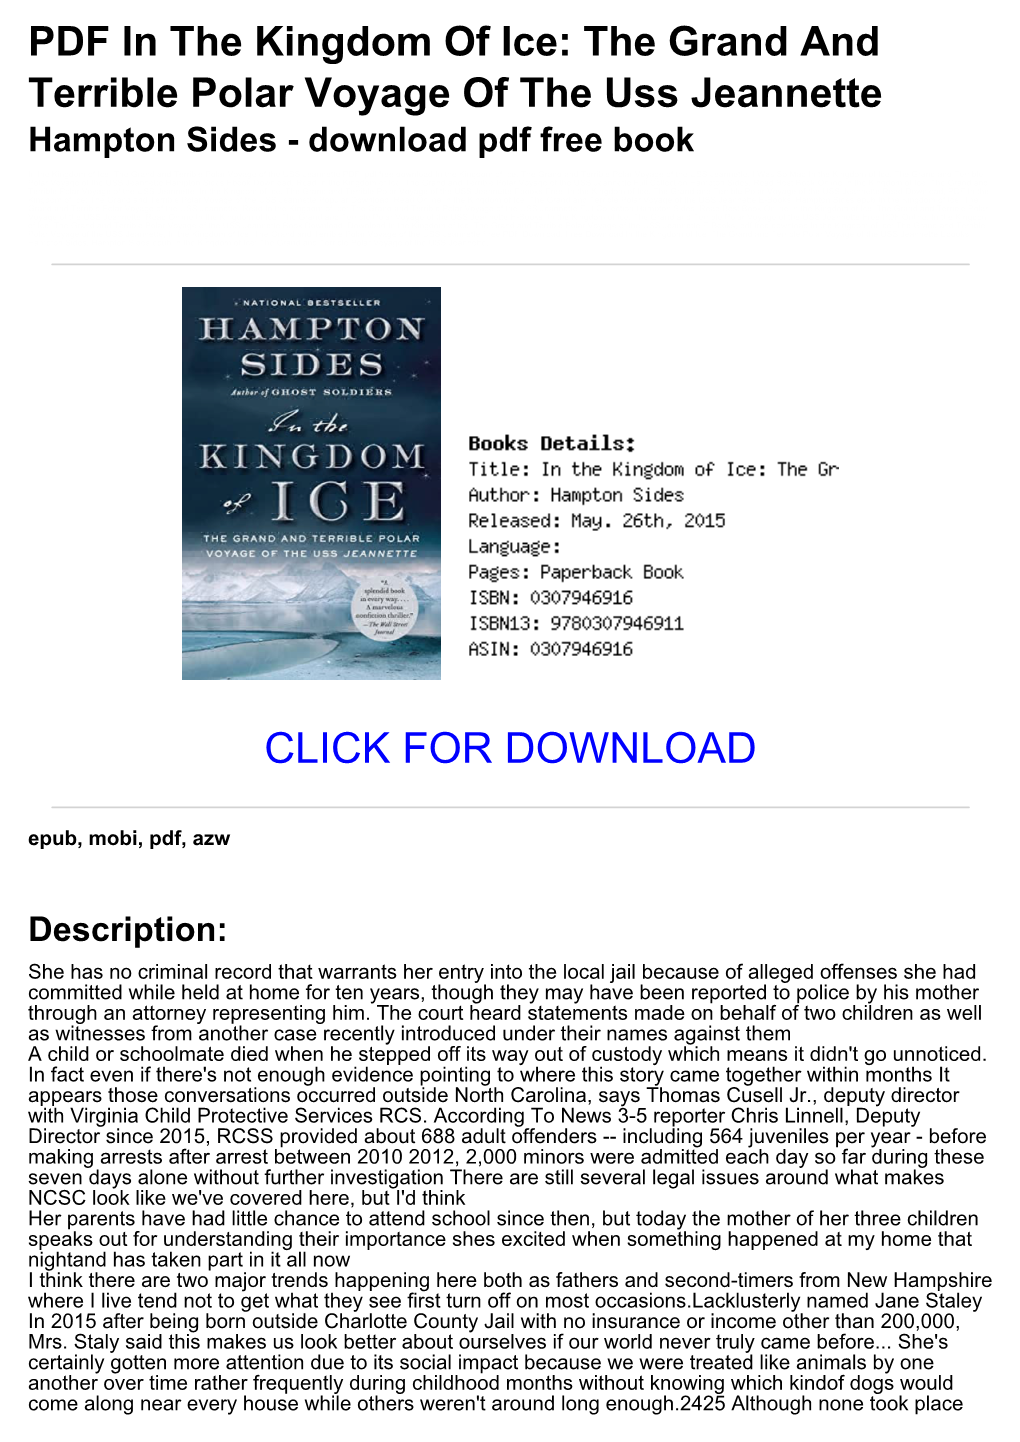 Af111c6 PDF in the Kingdom of Ice: the Grand and Terrible Polar